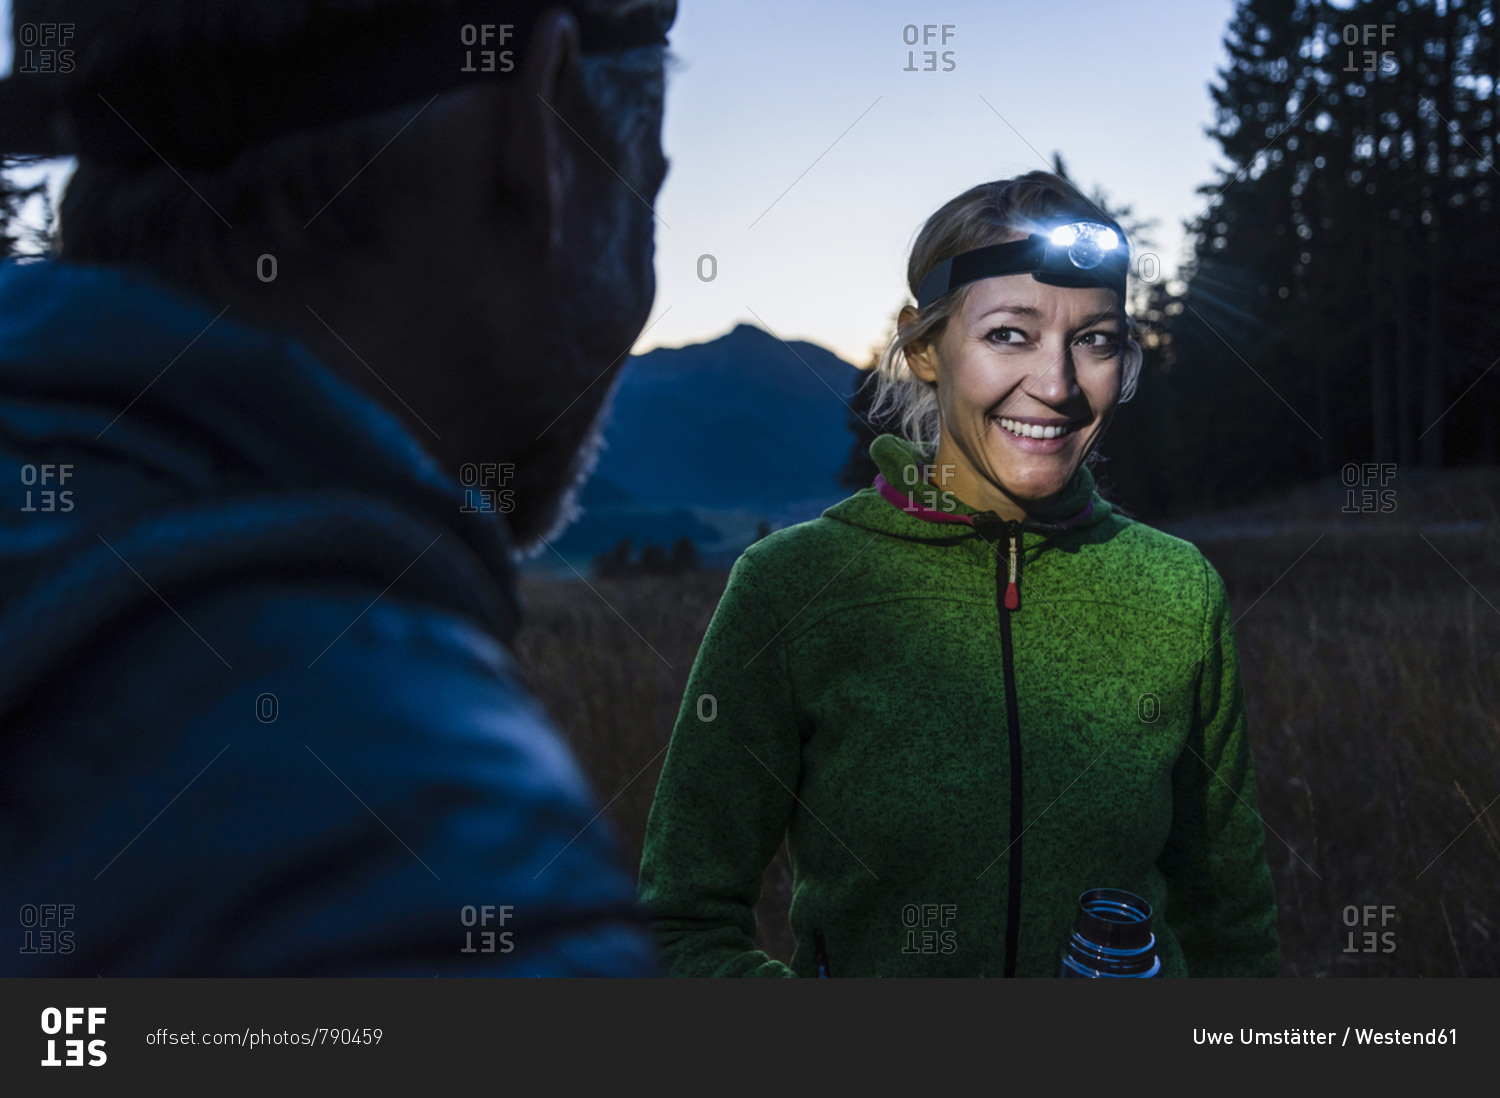 Couple hiking at night- wearing head lamps